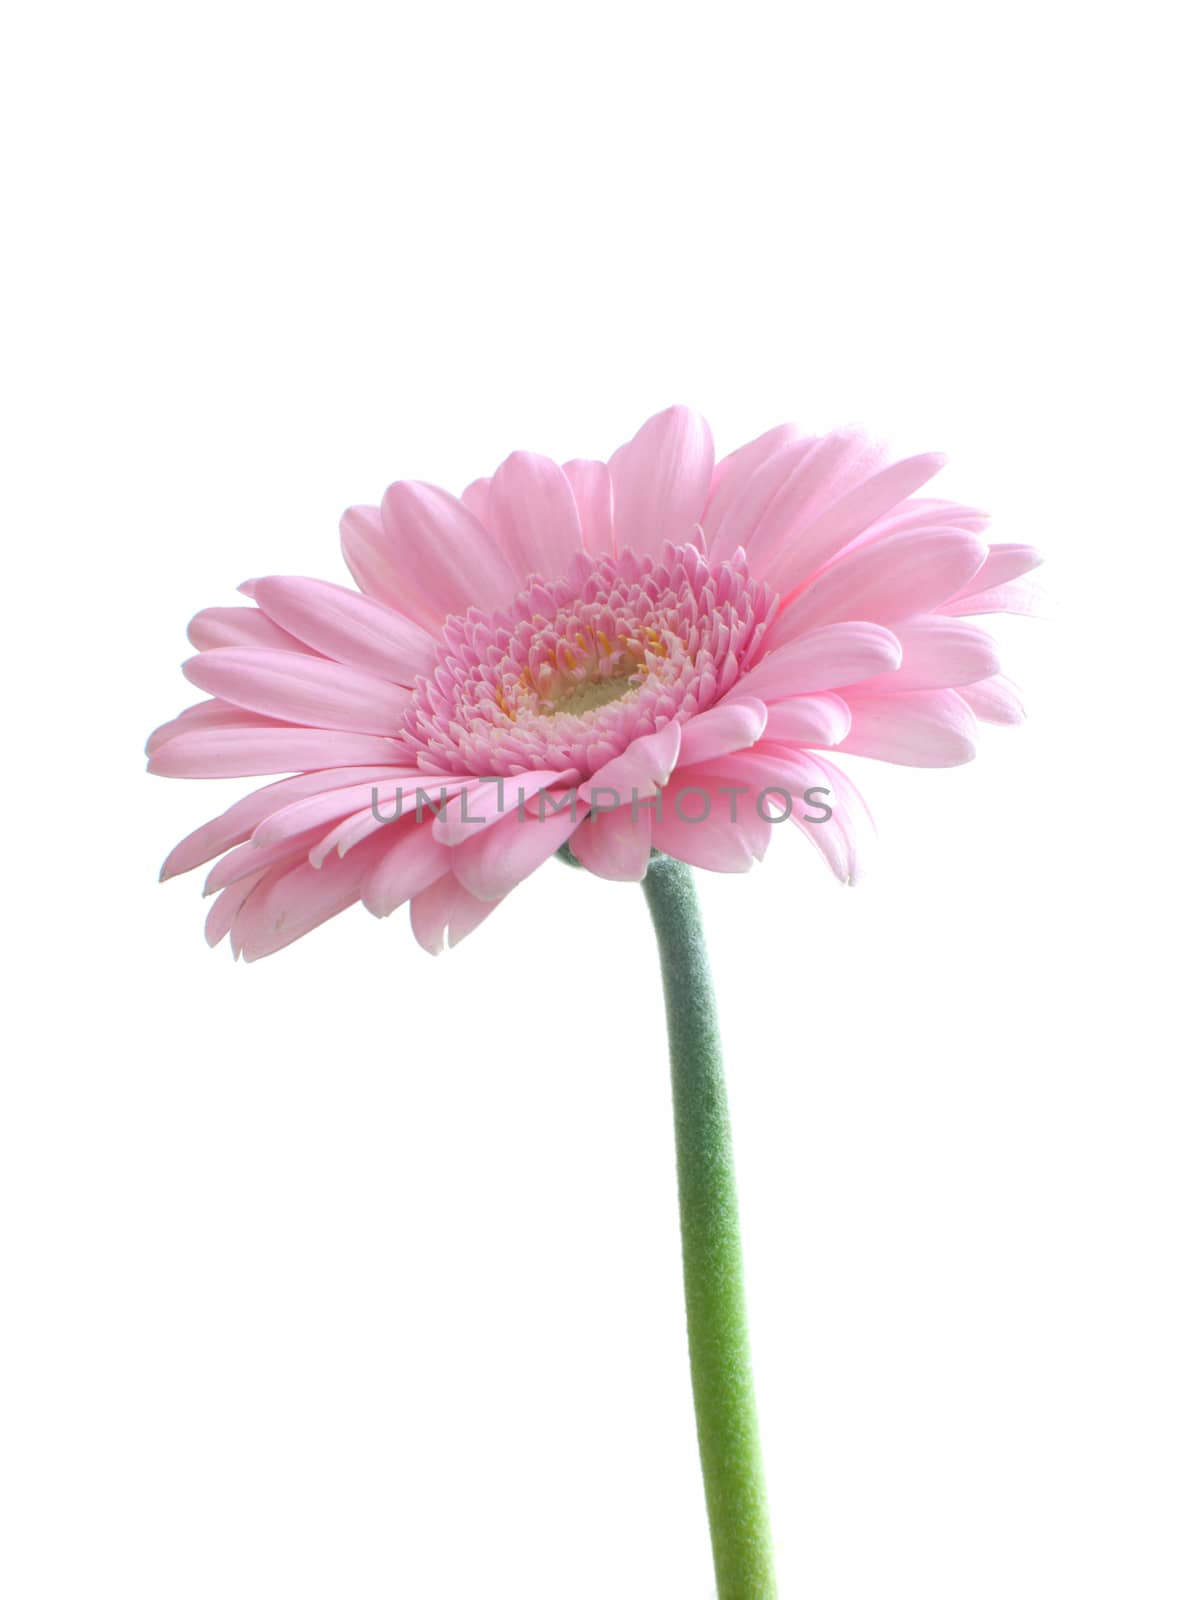 Pink gerbera daisy over a white background